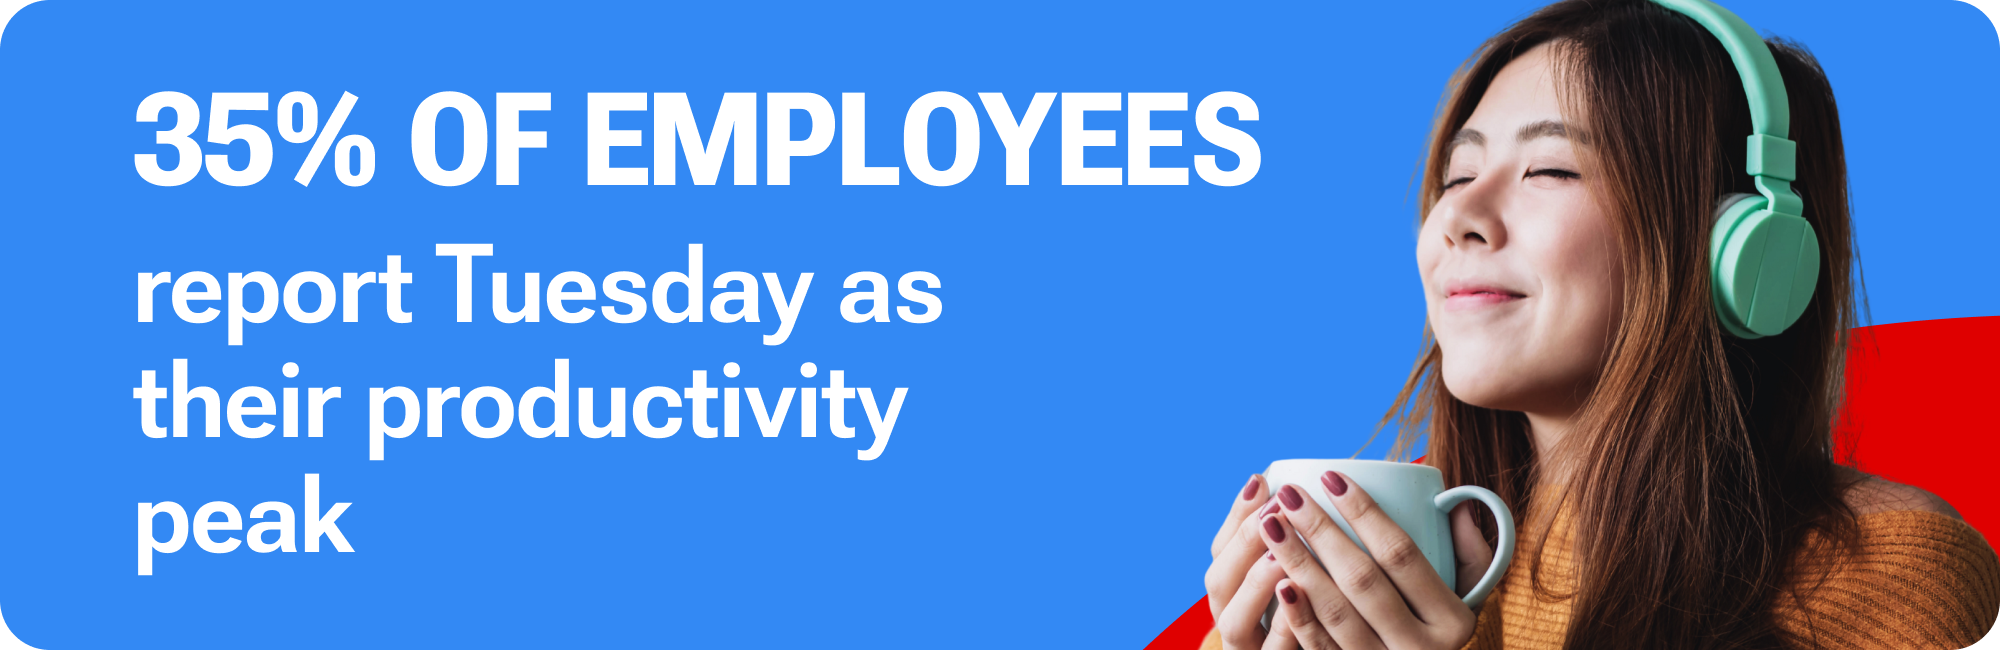 Top days in the office employee engagement trends